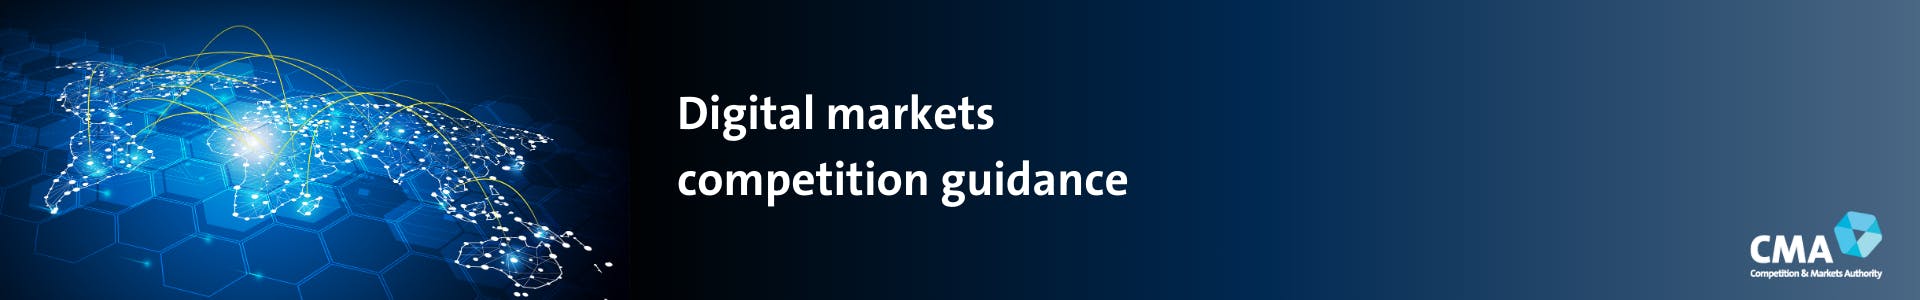 Digital markets competition guidance 